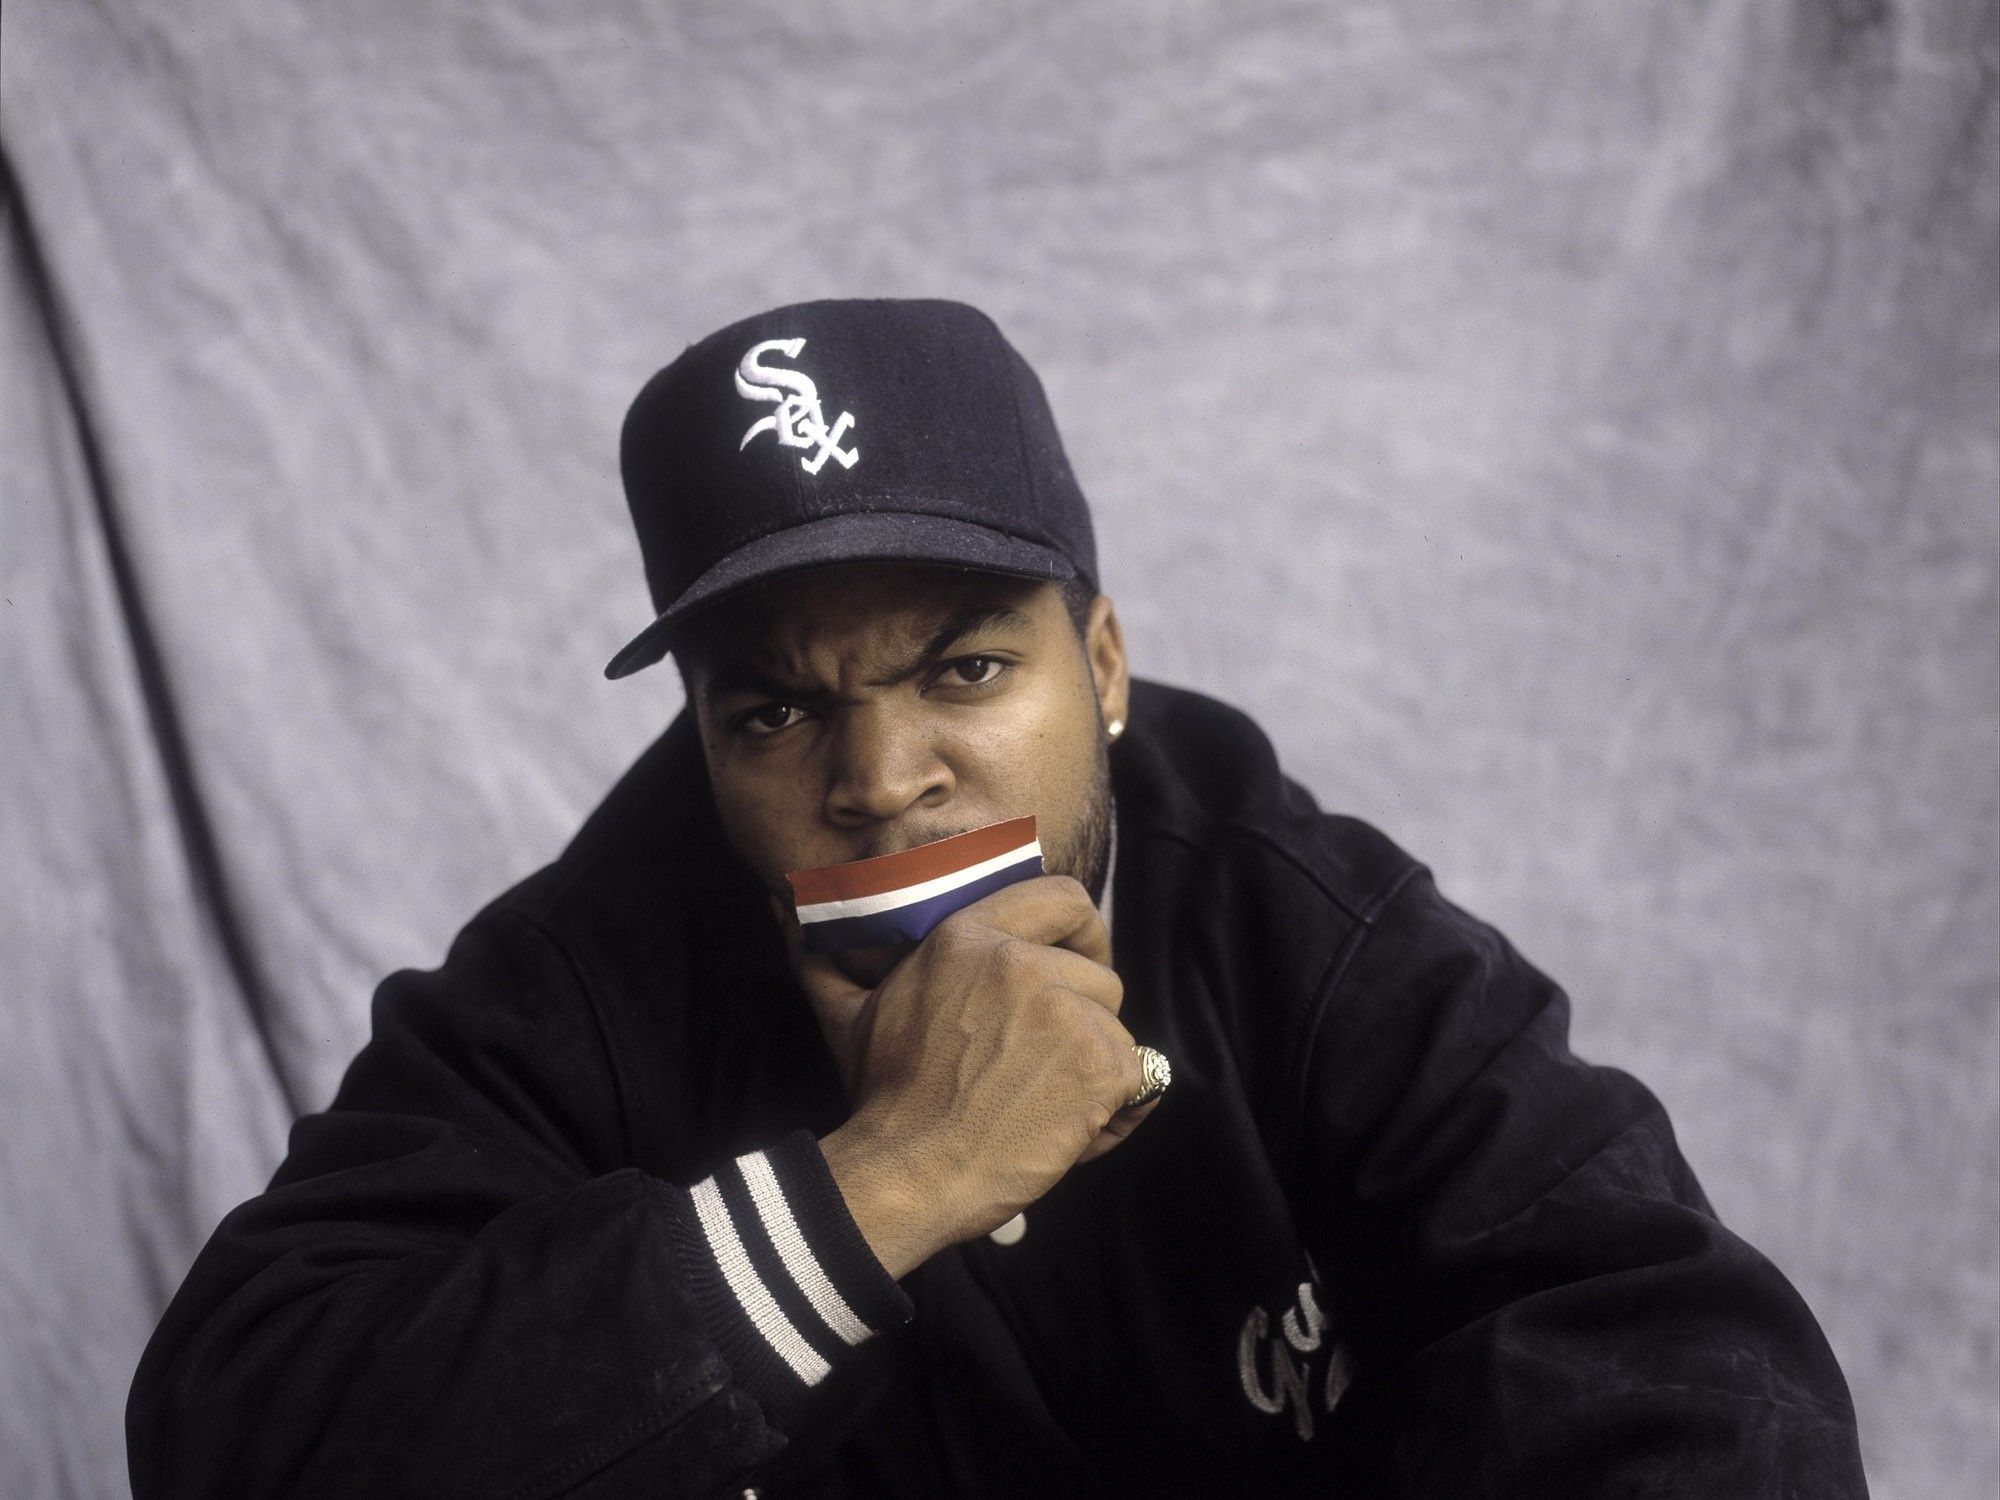 10 of the greatest references to baseball players found in hip-hop